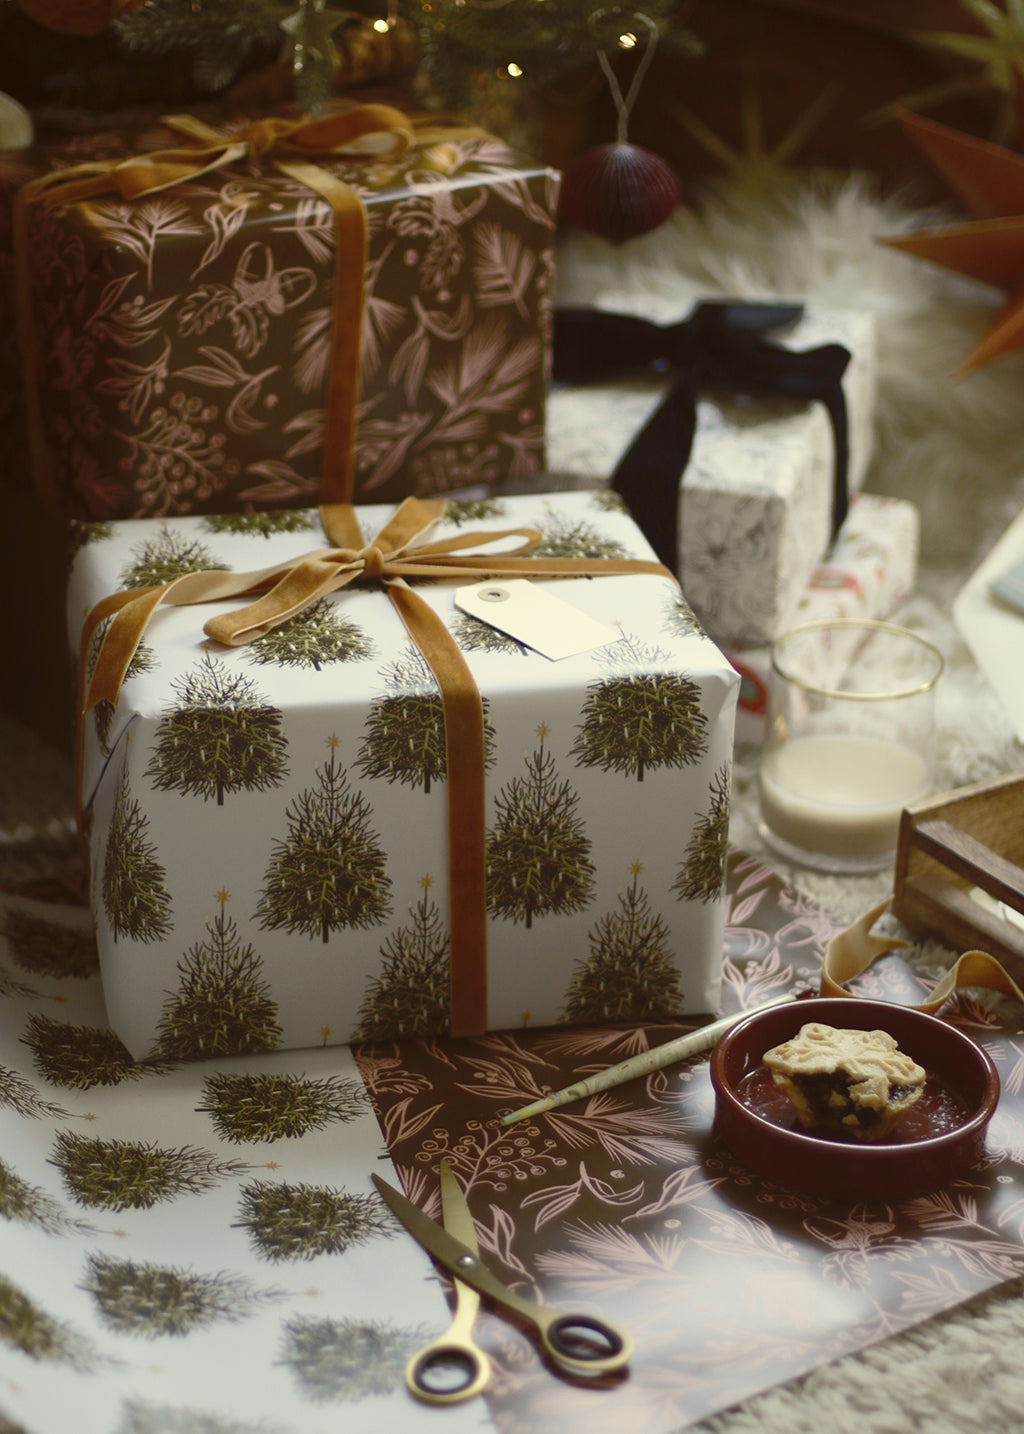 a gift wrapped with christmas tree patterned paper and tied with a gold velvet bow, alongside other beautiful gifts below the tree